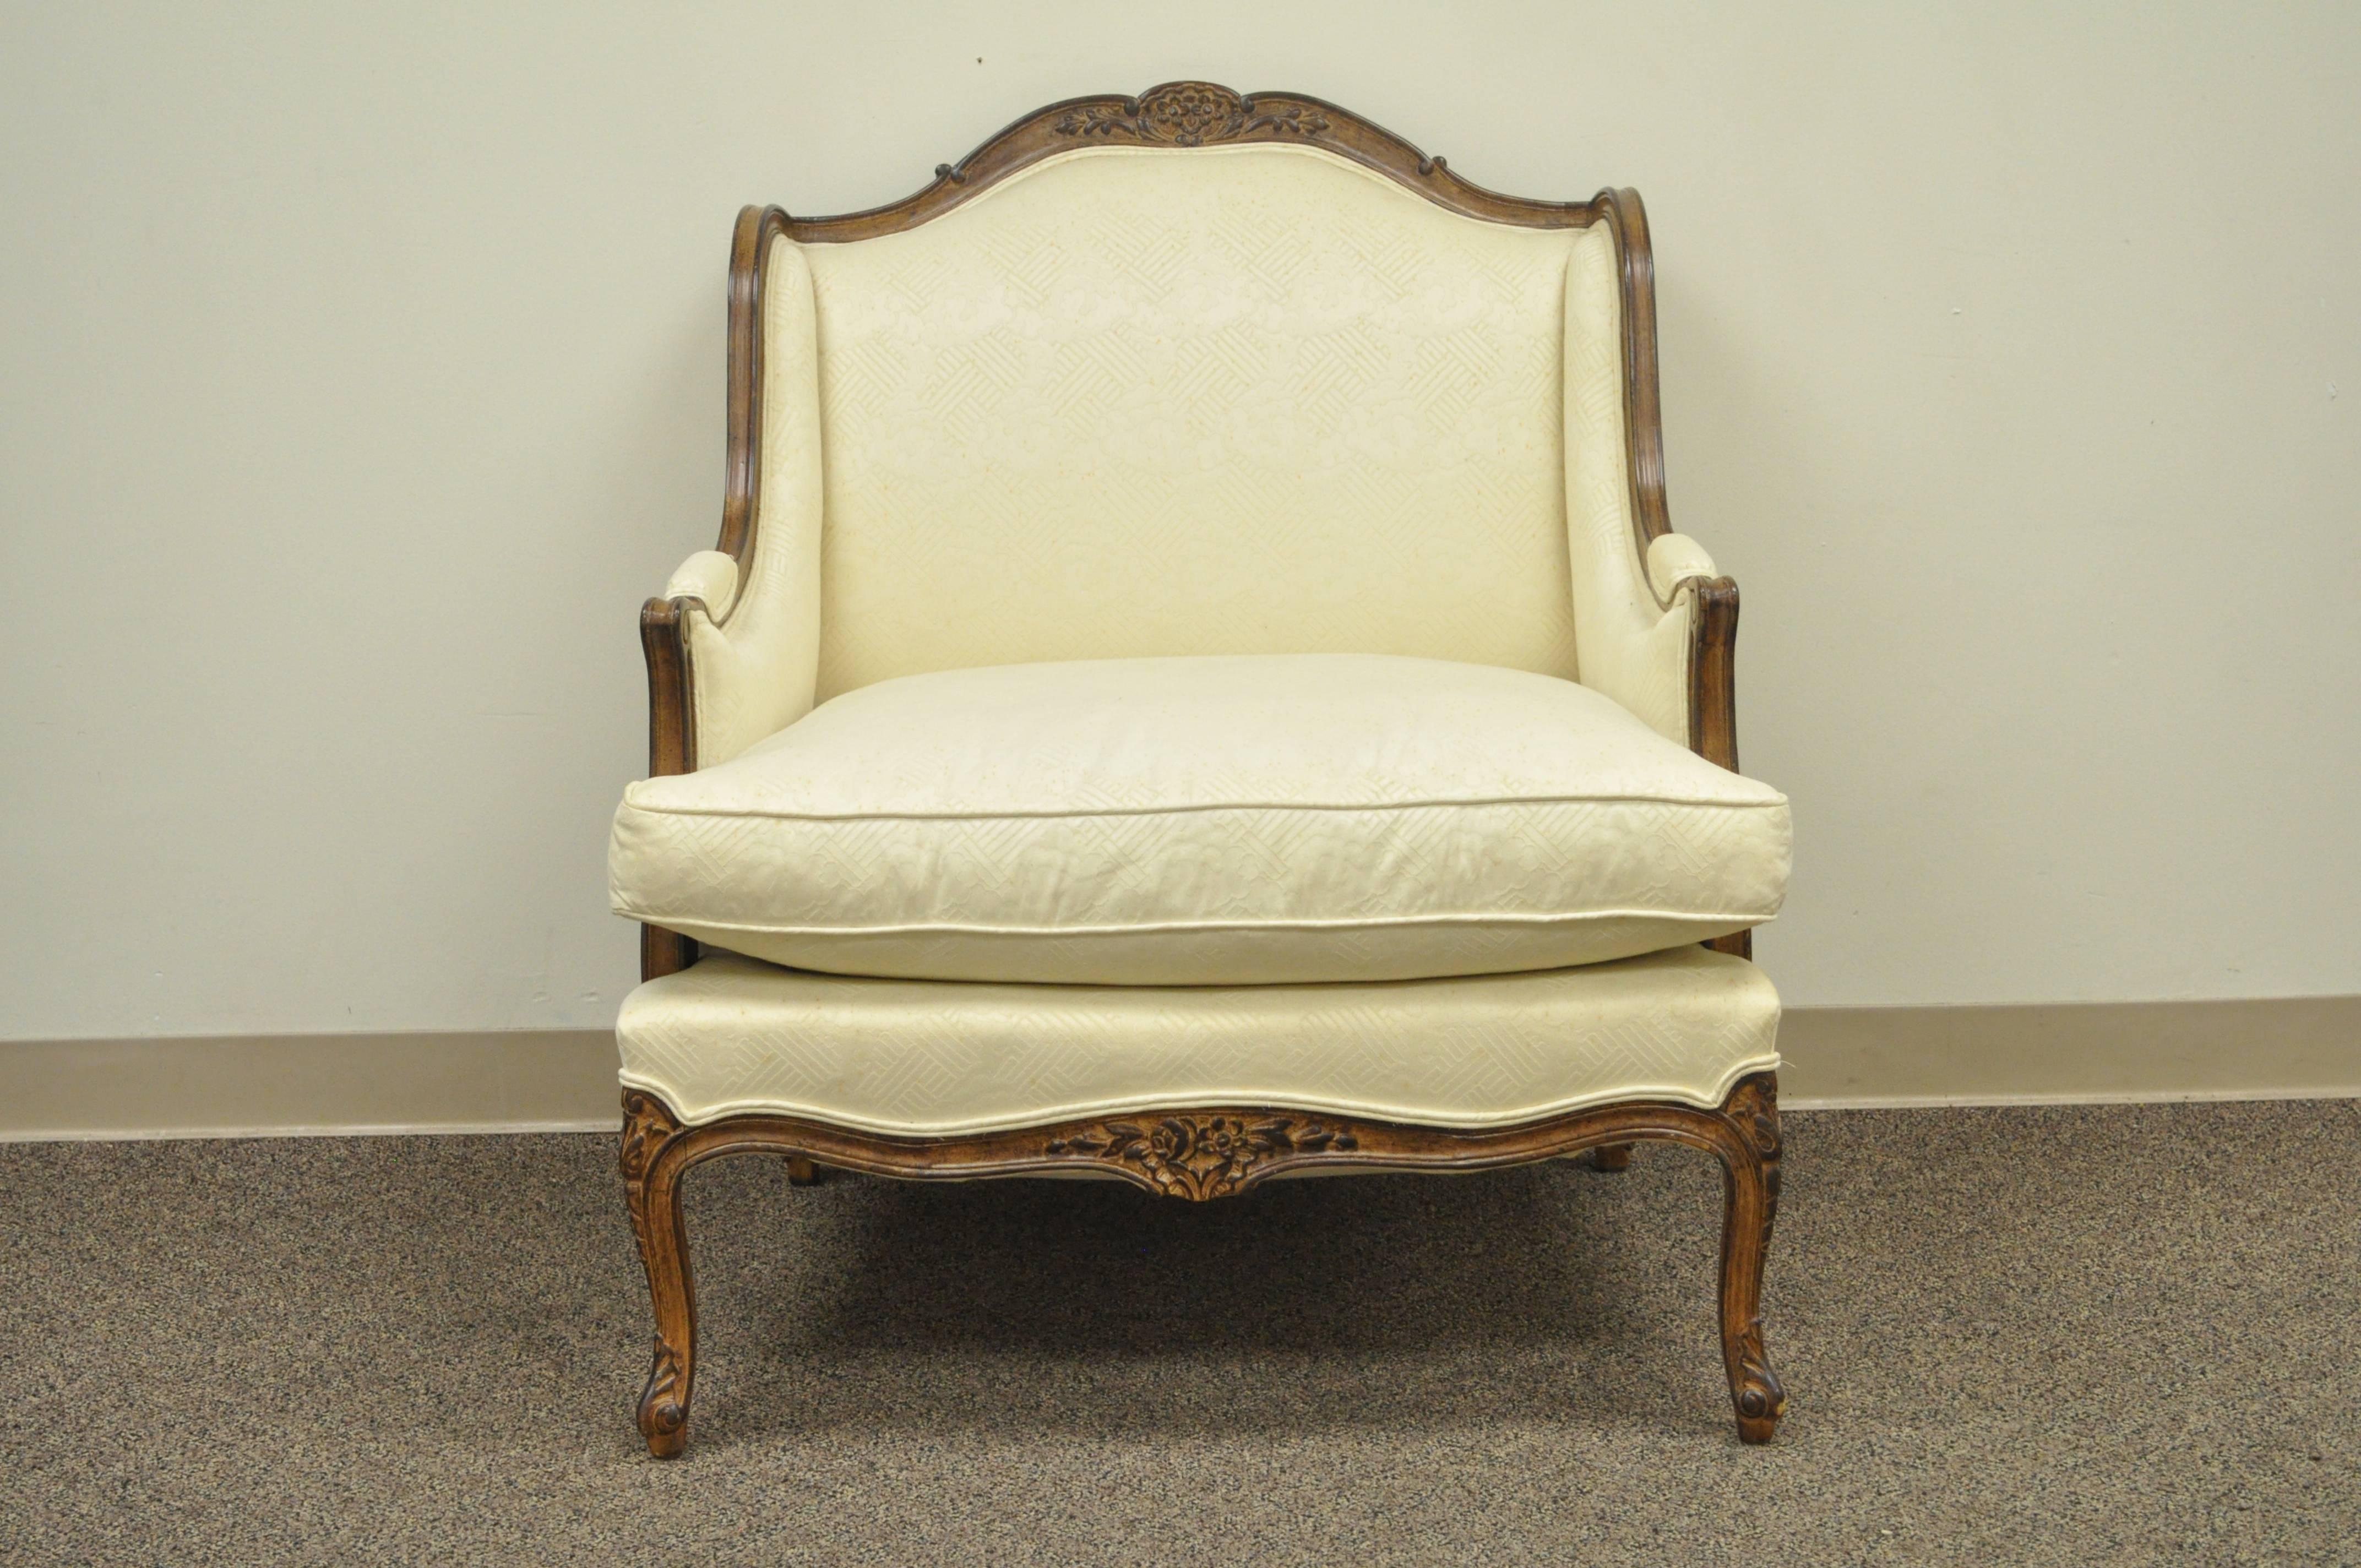 Vintage wide frame French Country / Louis XV style floral carved bergere arm chair. Lounge chair features shapely cabriole legs, floral carved accents and Classic and elegant form.